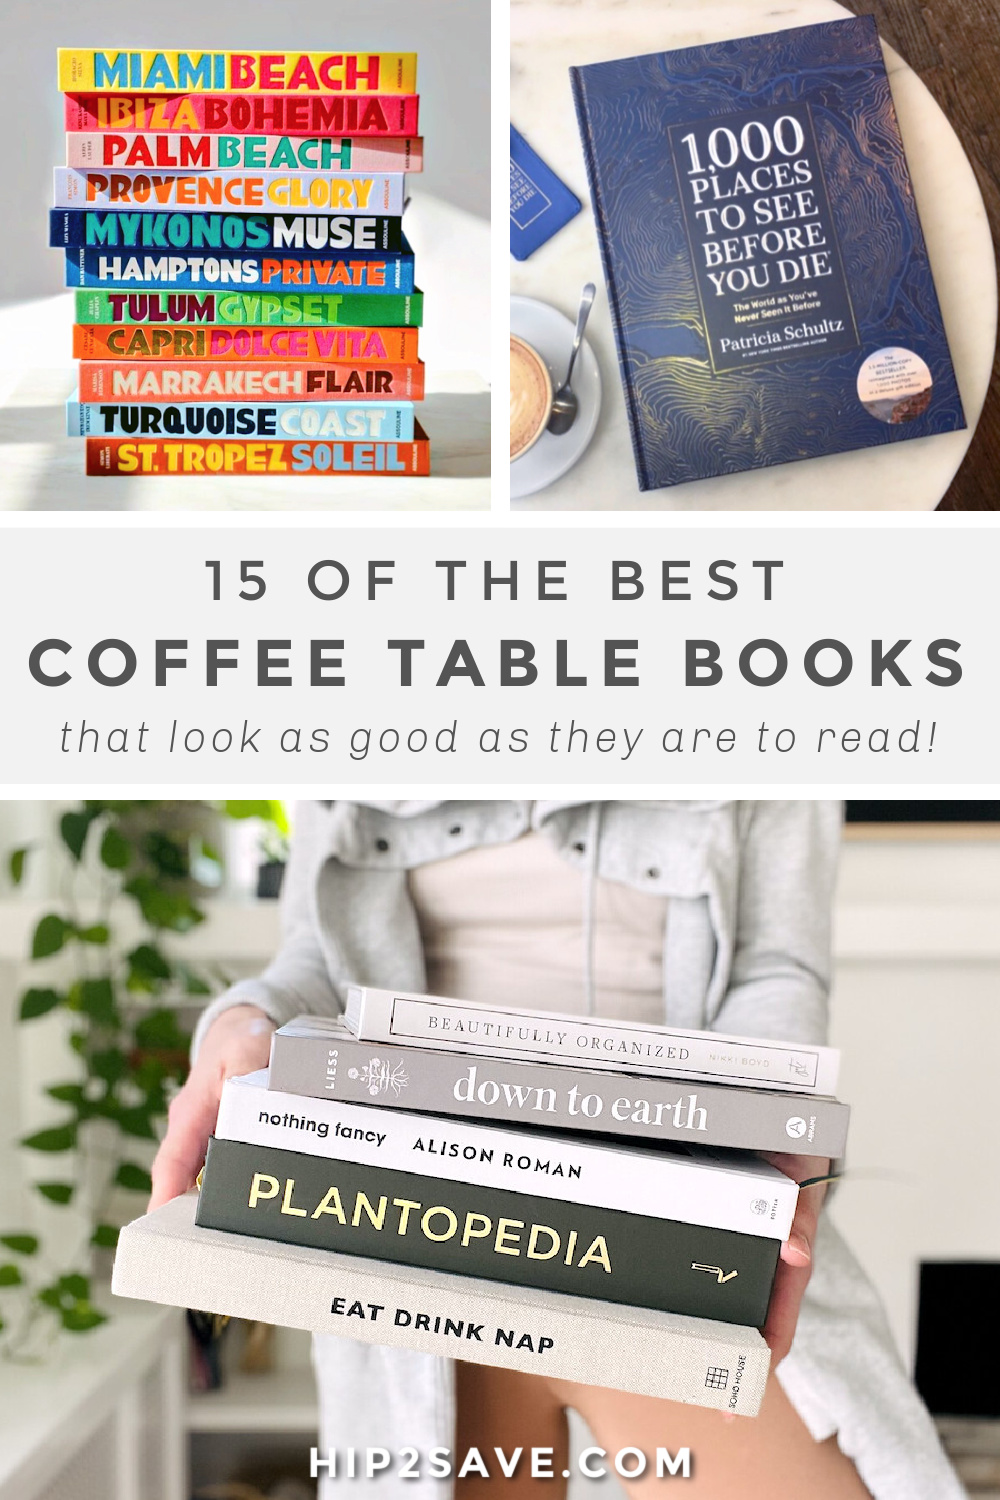 Best Coffee Table Books to Let Your Mind Wander